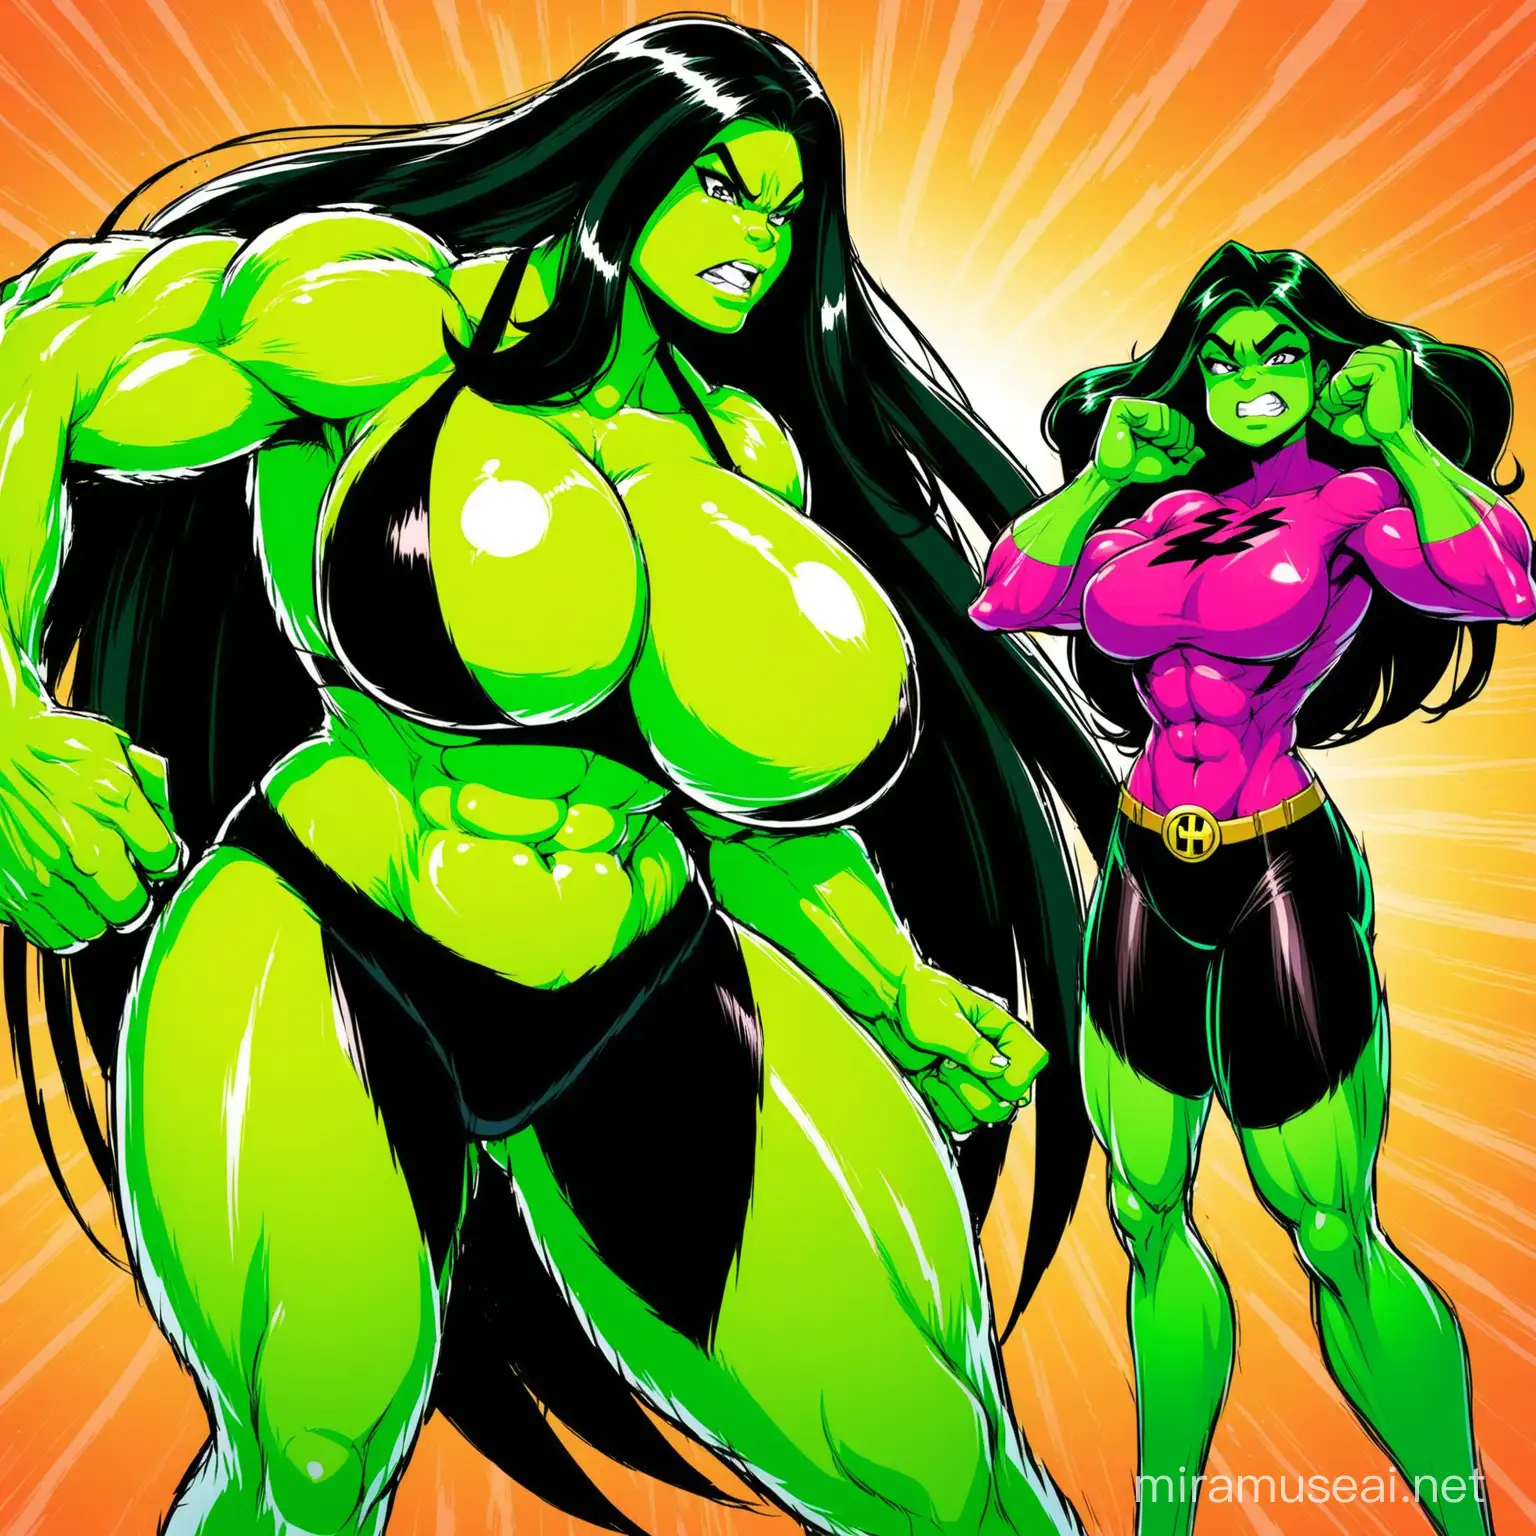 Epic Shego vs Kim Possible Red Hulk Battle with Massive Transformations